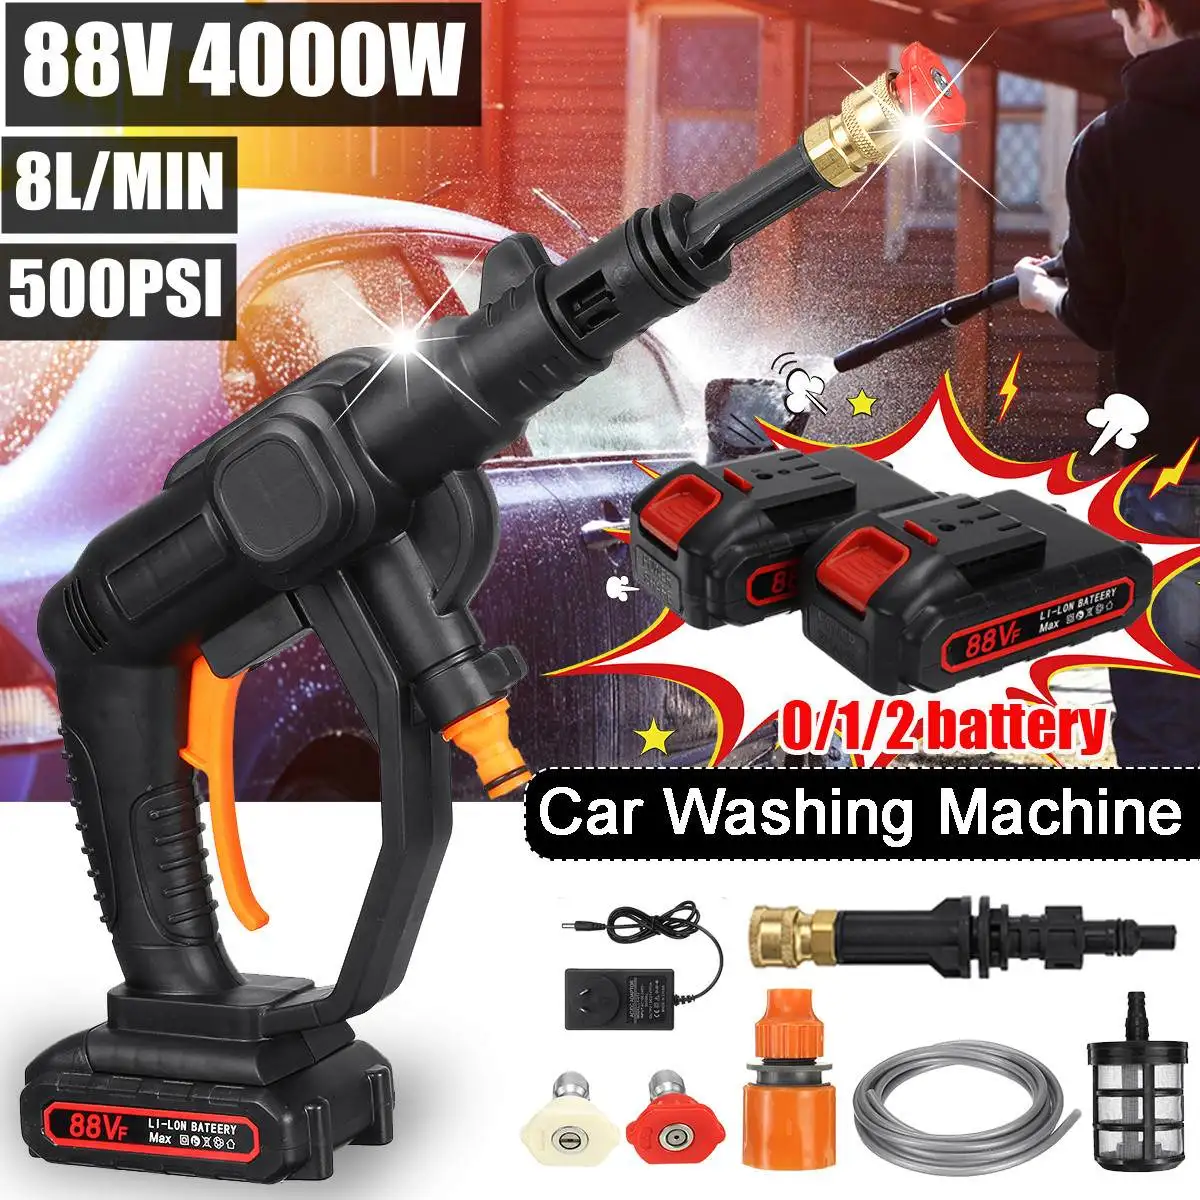 4000W 88V Cordless Car Washer Water Gun High Pressure Cleaner Washer Foam Auto Cleaning Care Car Wash Spray With 2pcs Battery